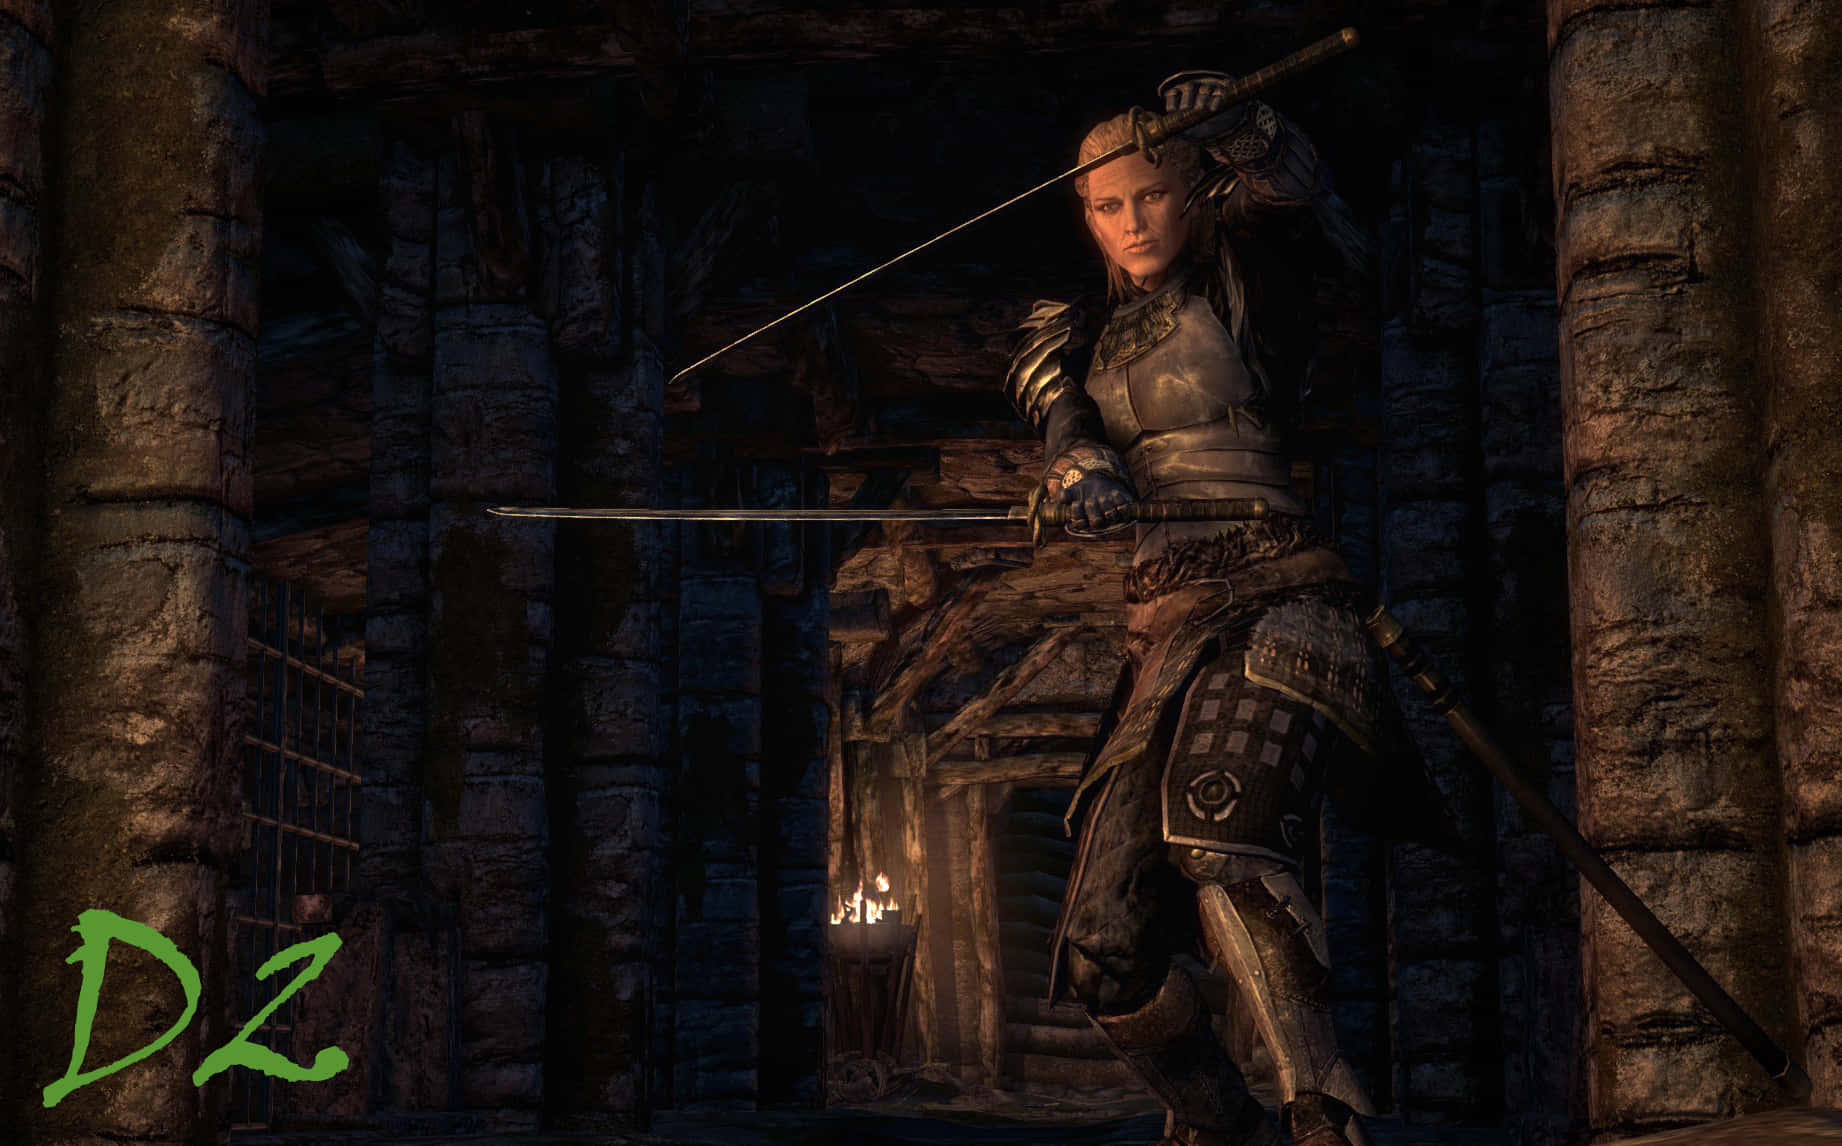 Delphine, the Blade's strong and resourceful warrior in Skyrim Wallpaper